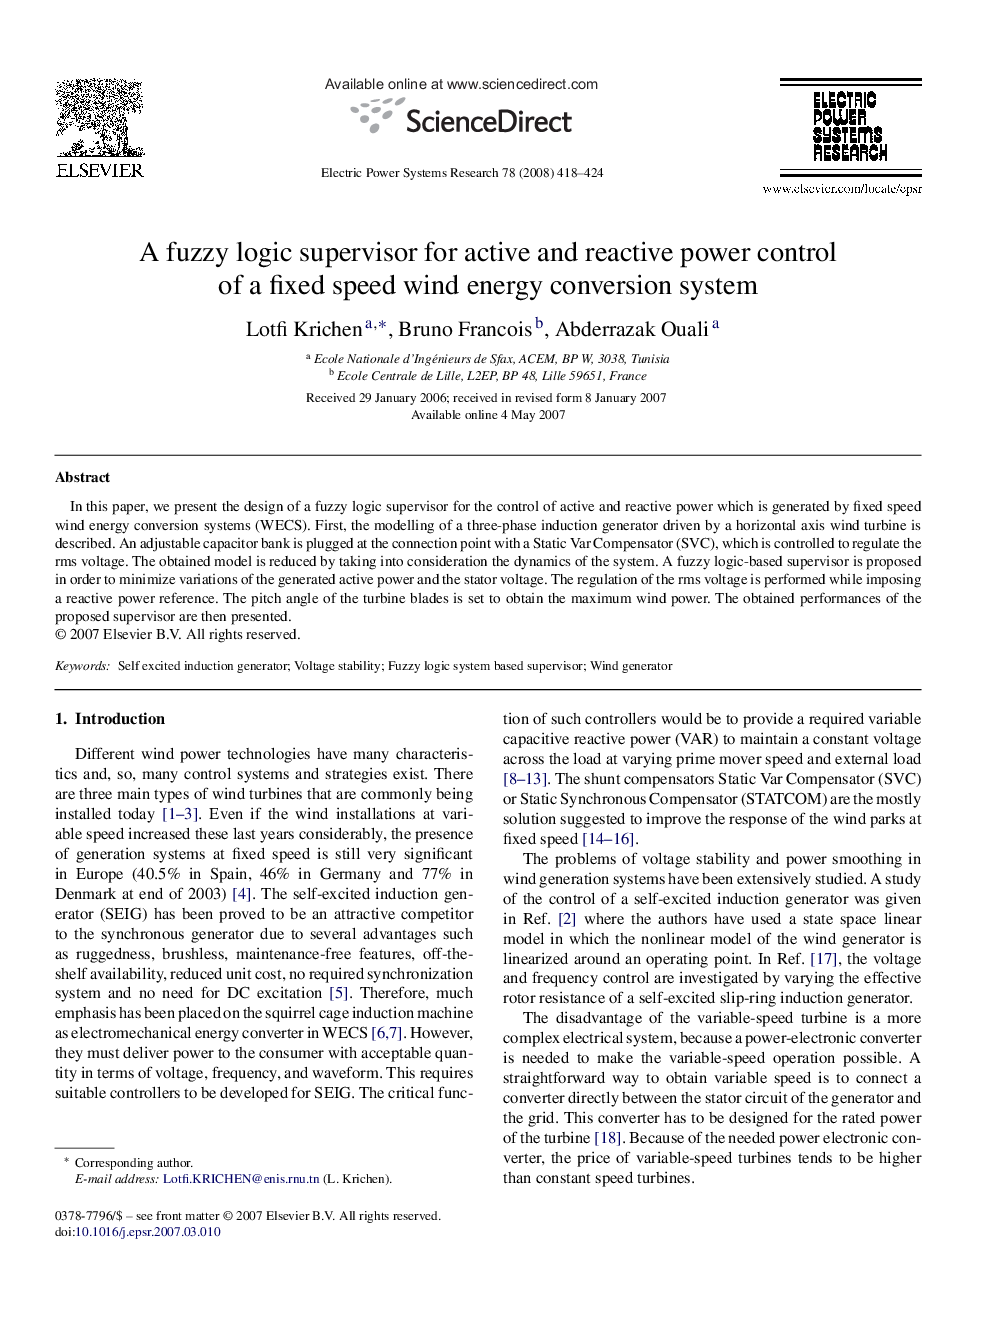 A fuzzy logic supervisor for active and reactive power control of a fixed speed wind energy conversion system